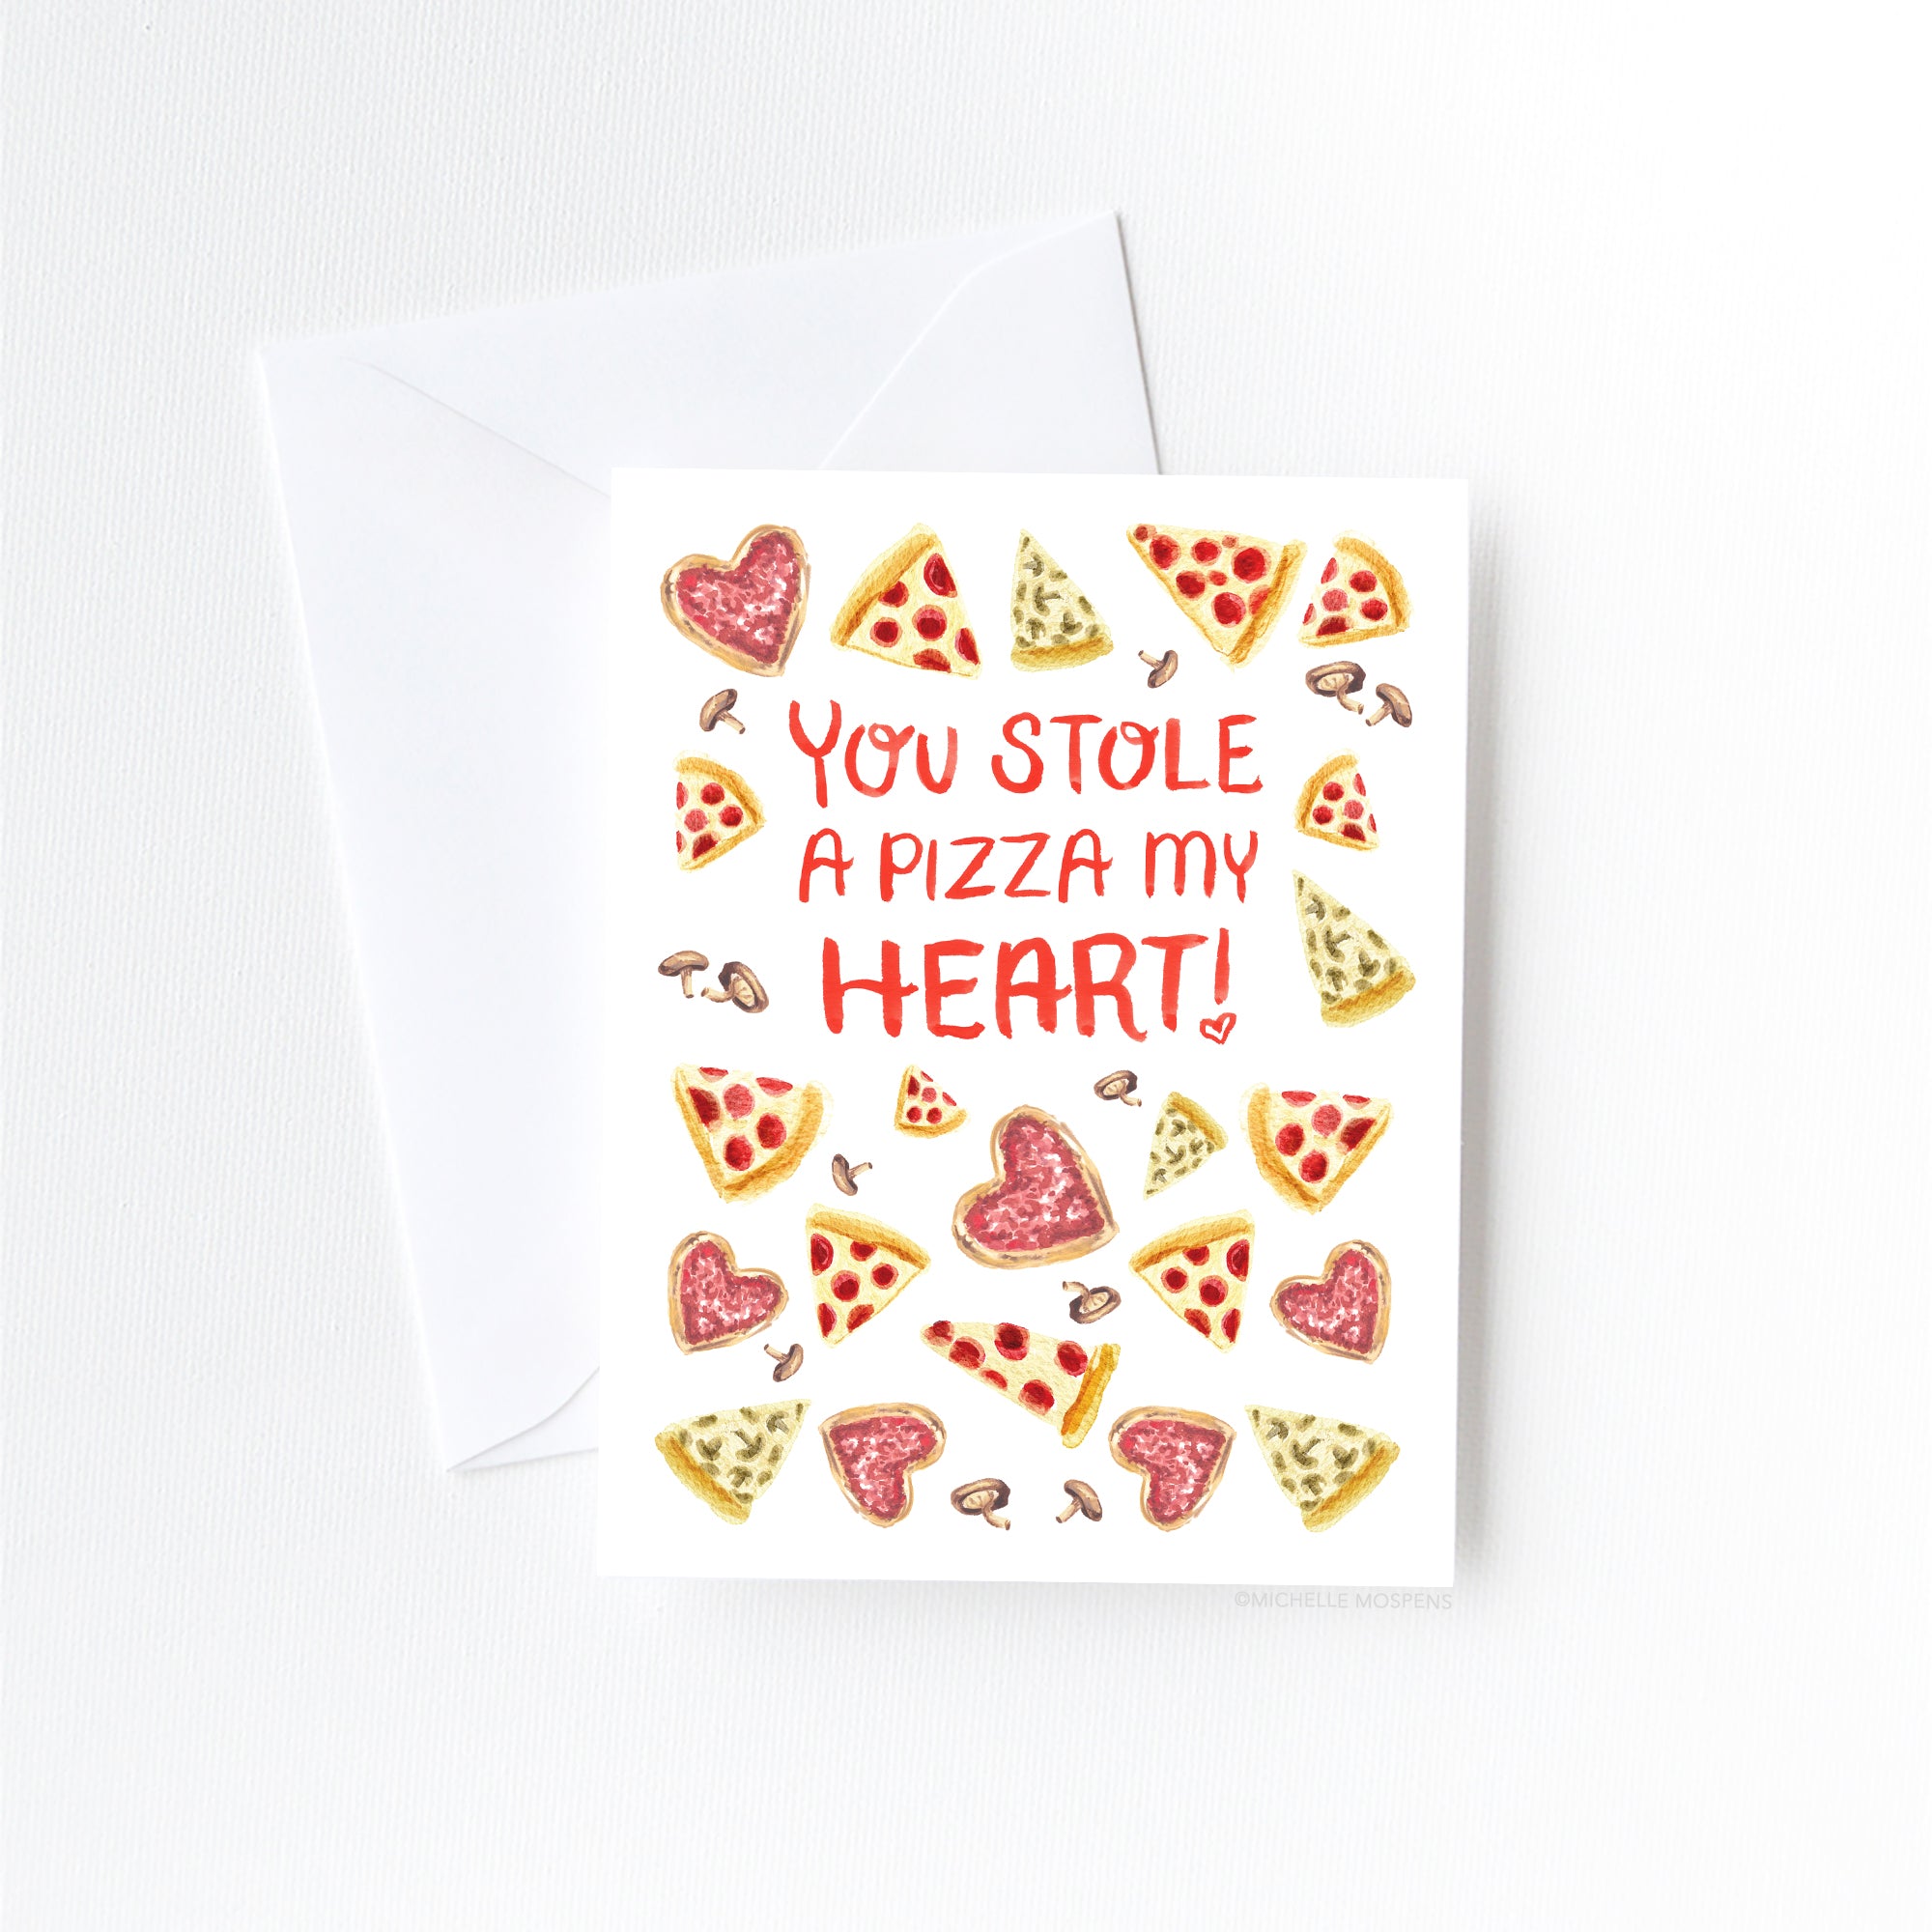 You Stole a Pizza My Heart Love Card by Michelle Mospens